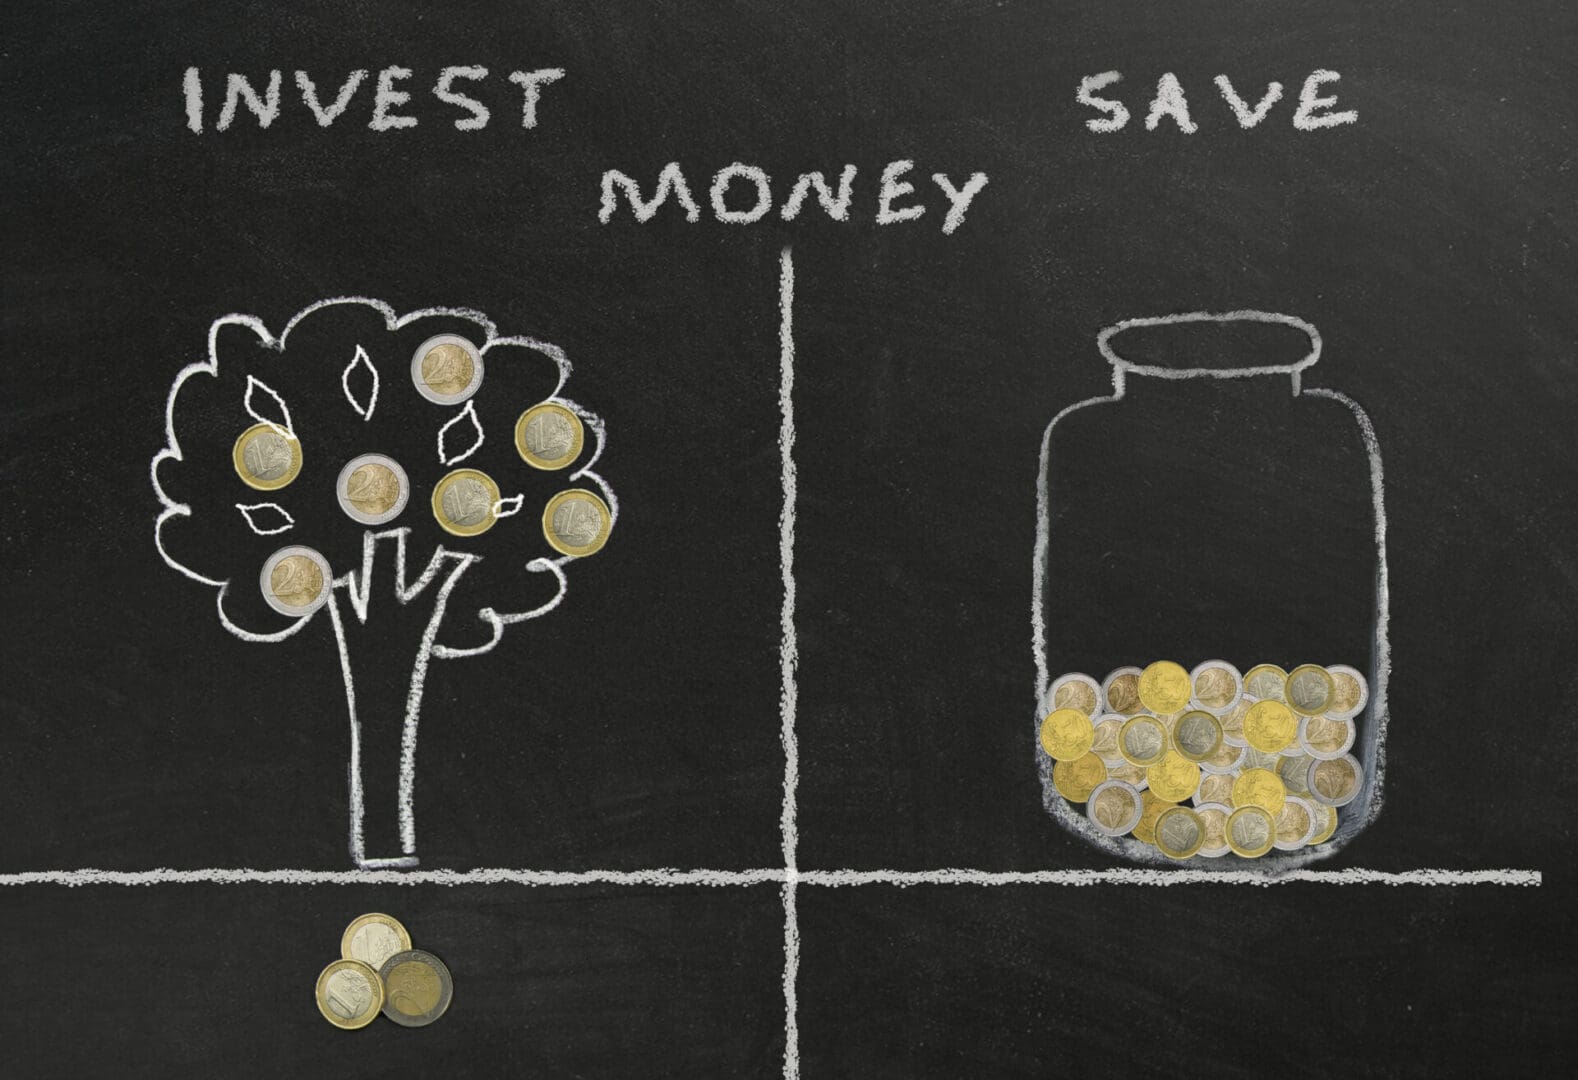 Chalk drawing comparison of investing and saving money, with coins depicted as leaves on an investment tree and inside a jar.